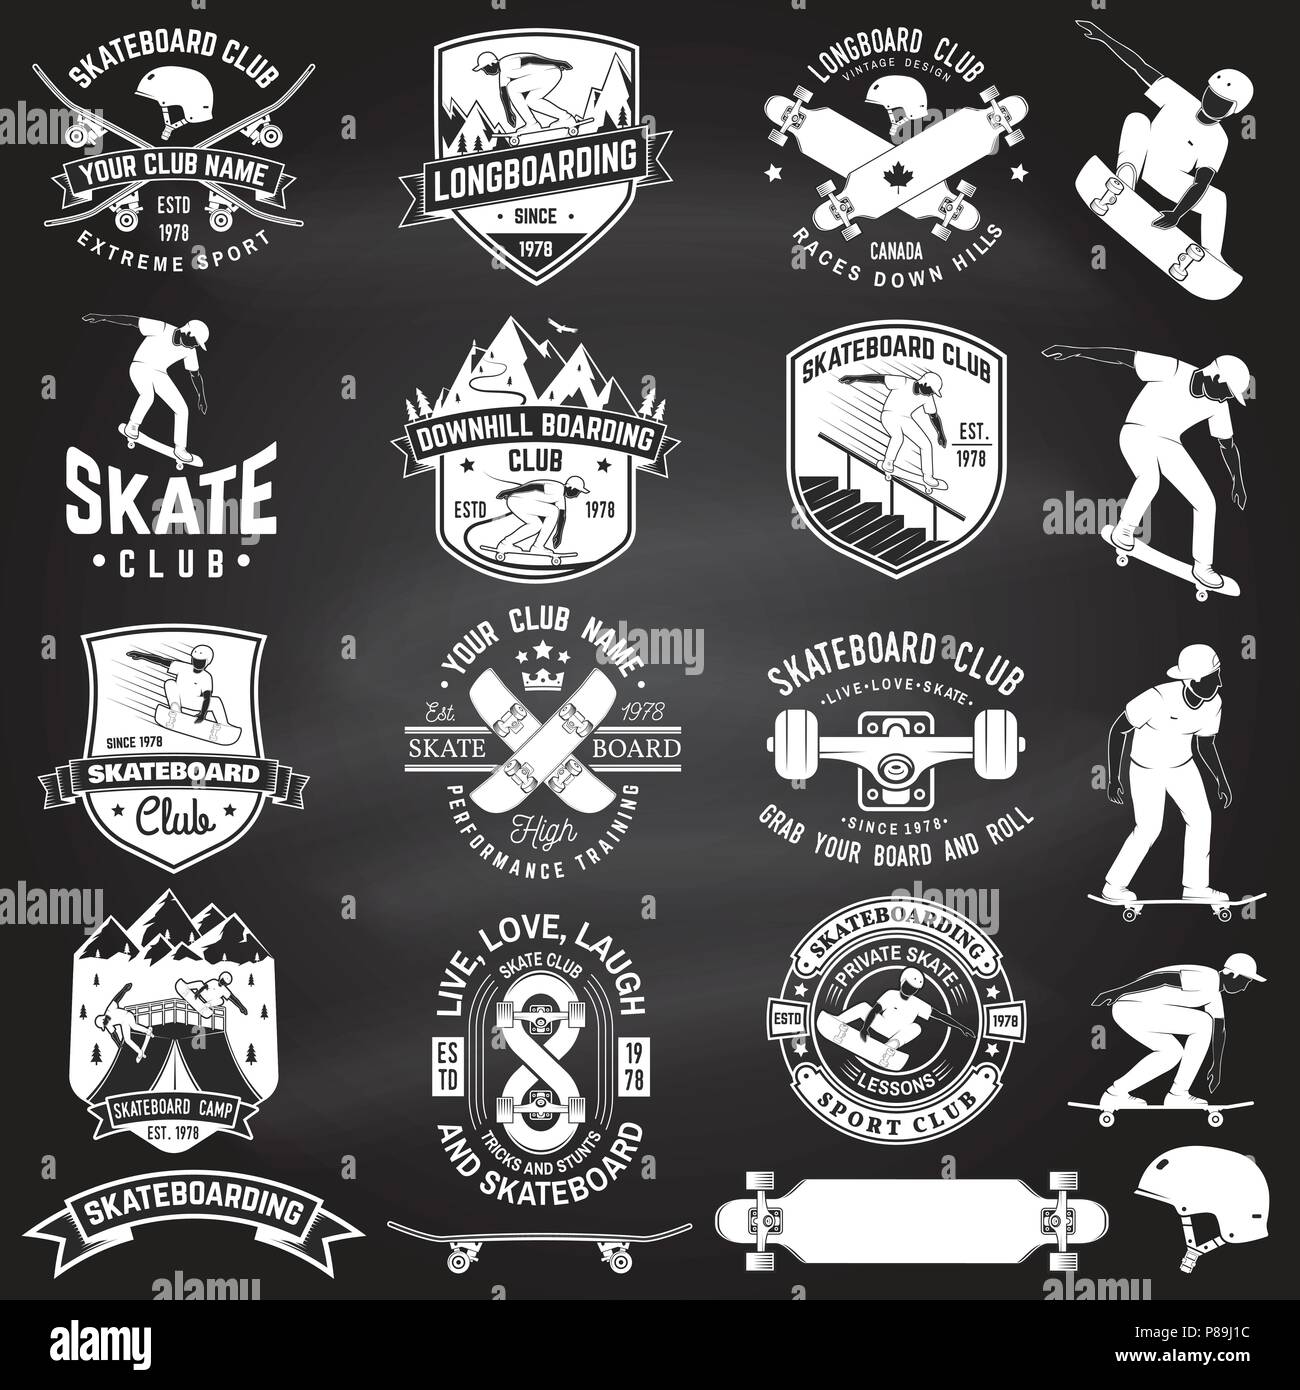 Set of Skateboard and longboard club signs on the chalkboard with design element. Vector. For skate club emblems, patch, t-shirt design. Vintage design with skateboards, skate truck and helmet. Stock Vector